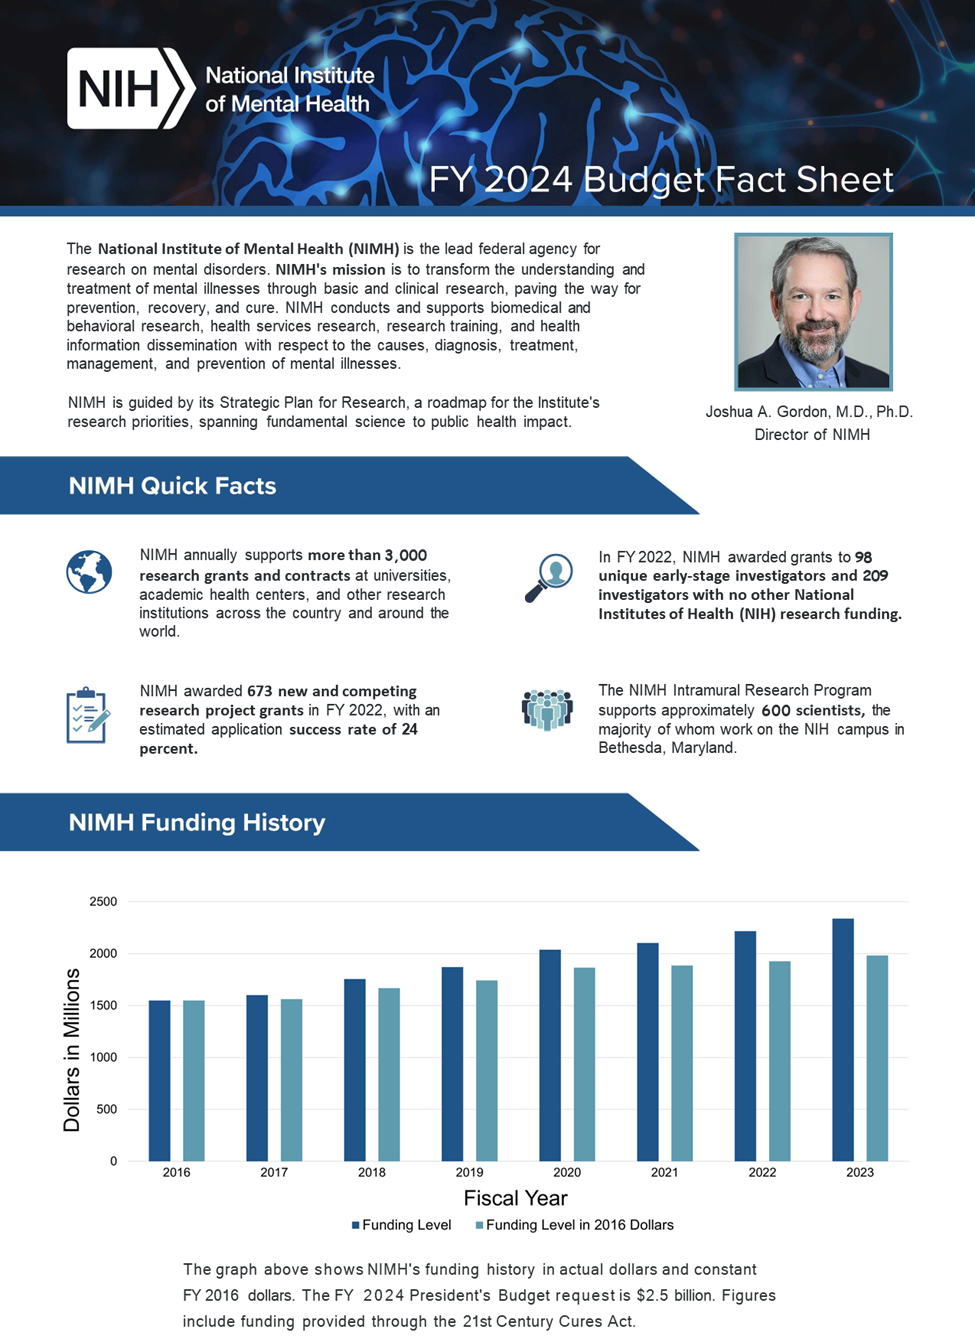 NIMH FY 2024 Budget Fact Sheet Page 1